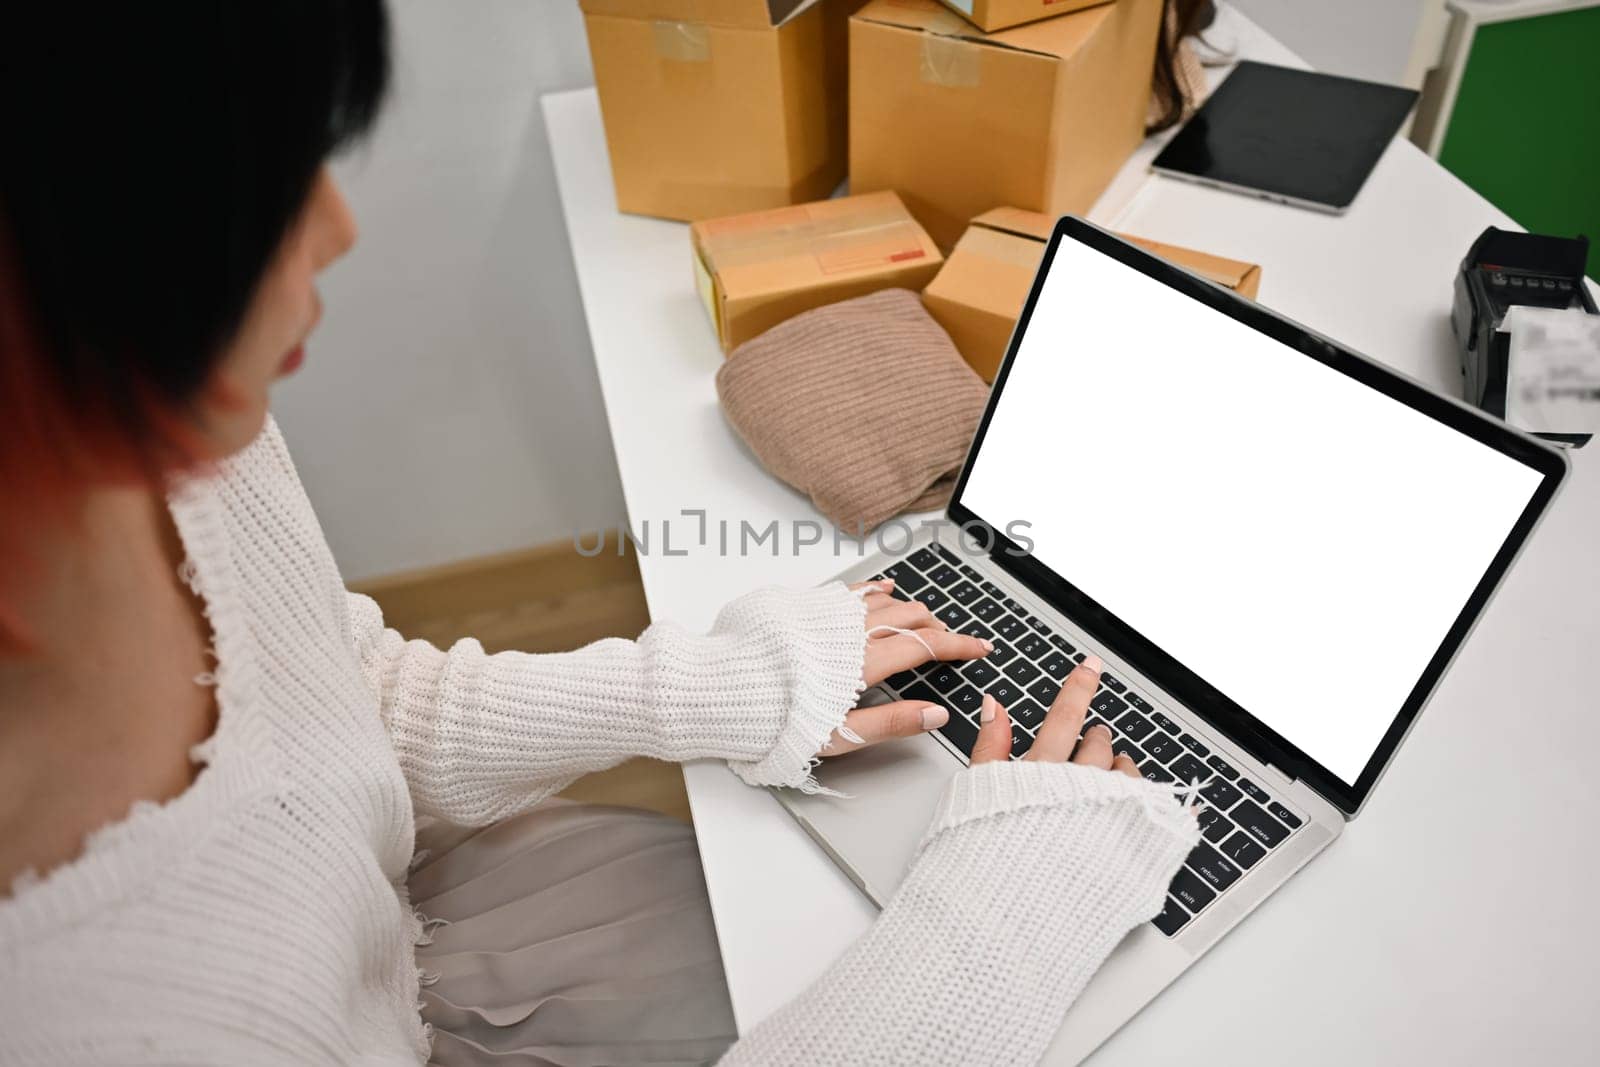 Cropped shot of female online seller using laptop, checking customer address or orders in an online store.